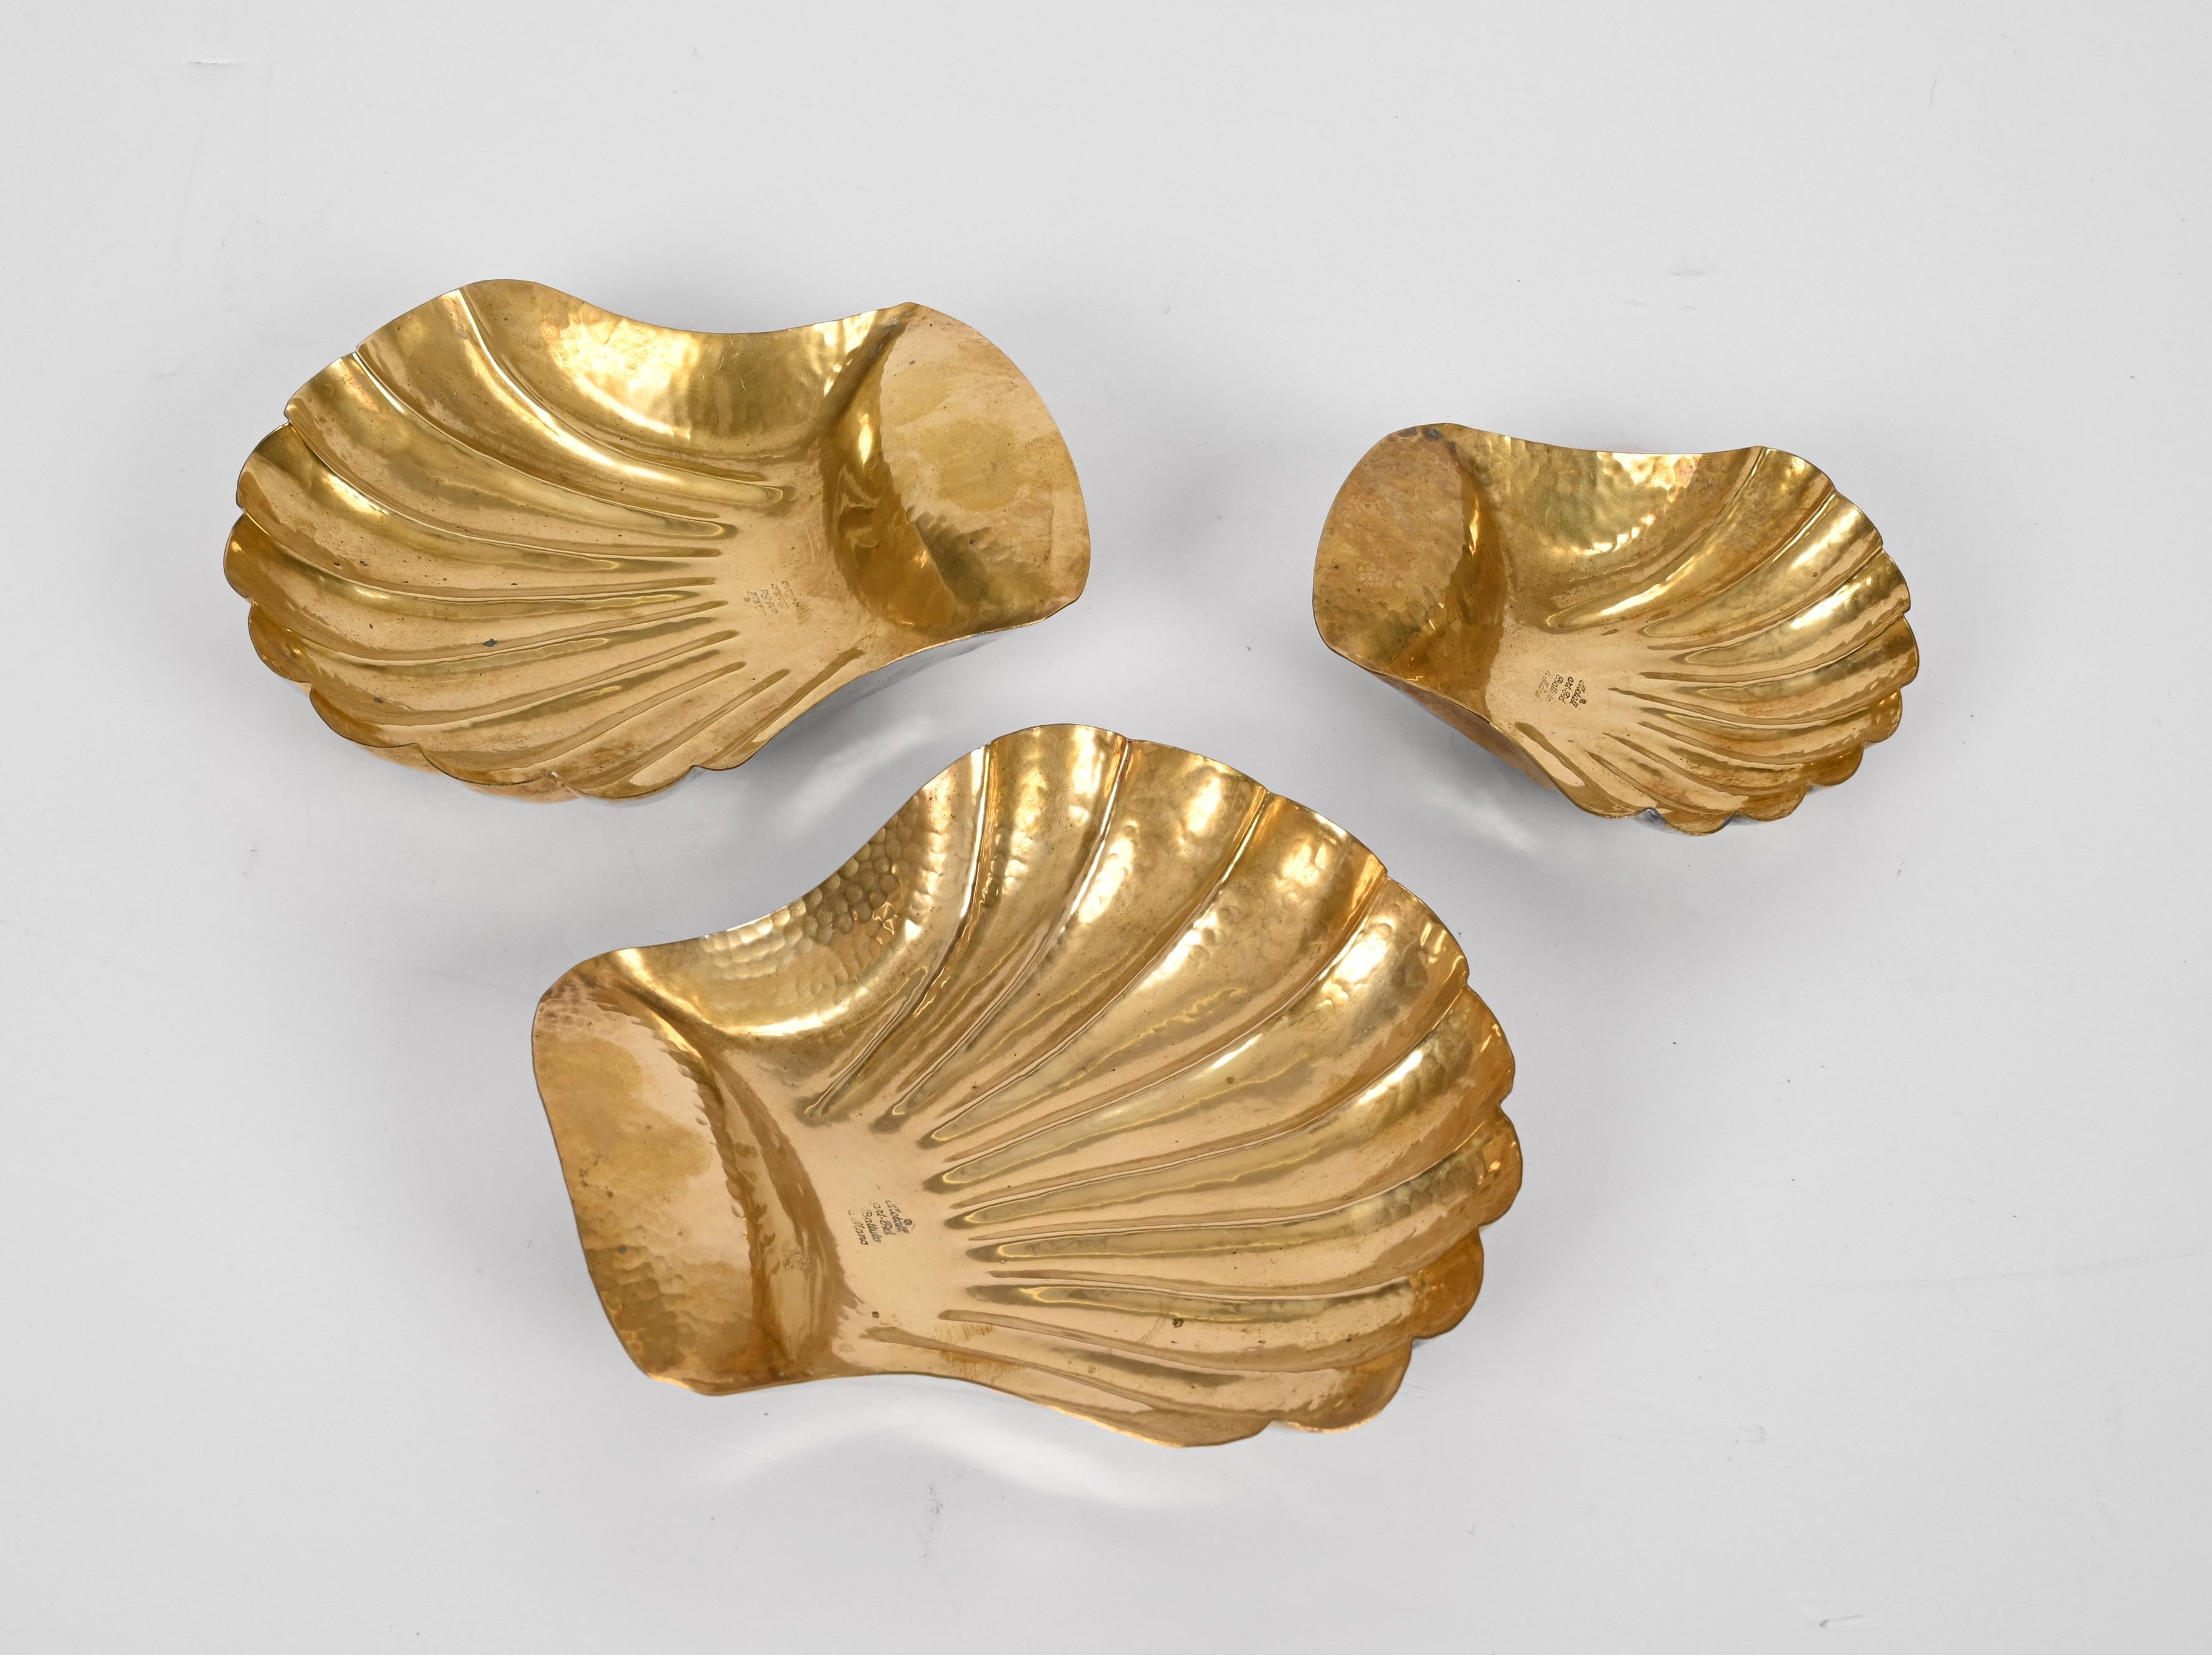 Amazing midcentury set of three shell shaped bowls in solid brass. This delightful piece was designed in Italy during the 1970s for Metal Art PD.

The peculiarity of this article is that, as can be seen from the lower Italian words in the